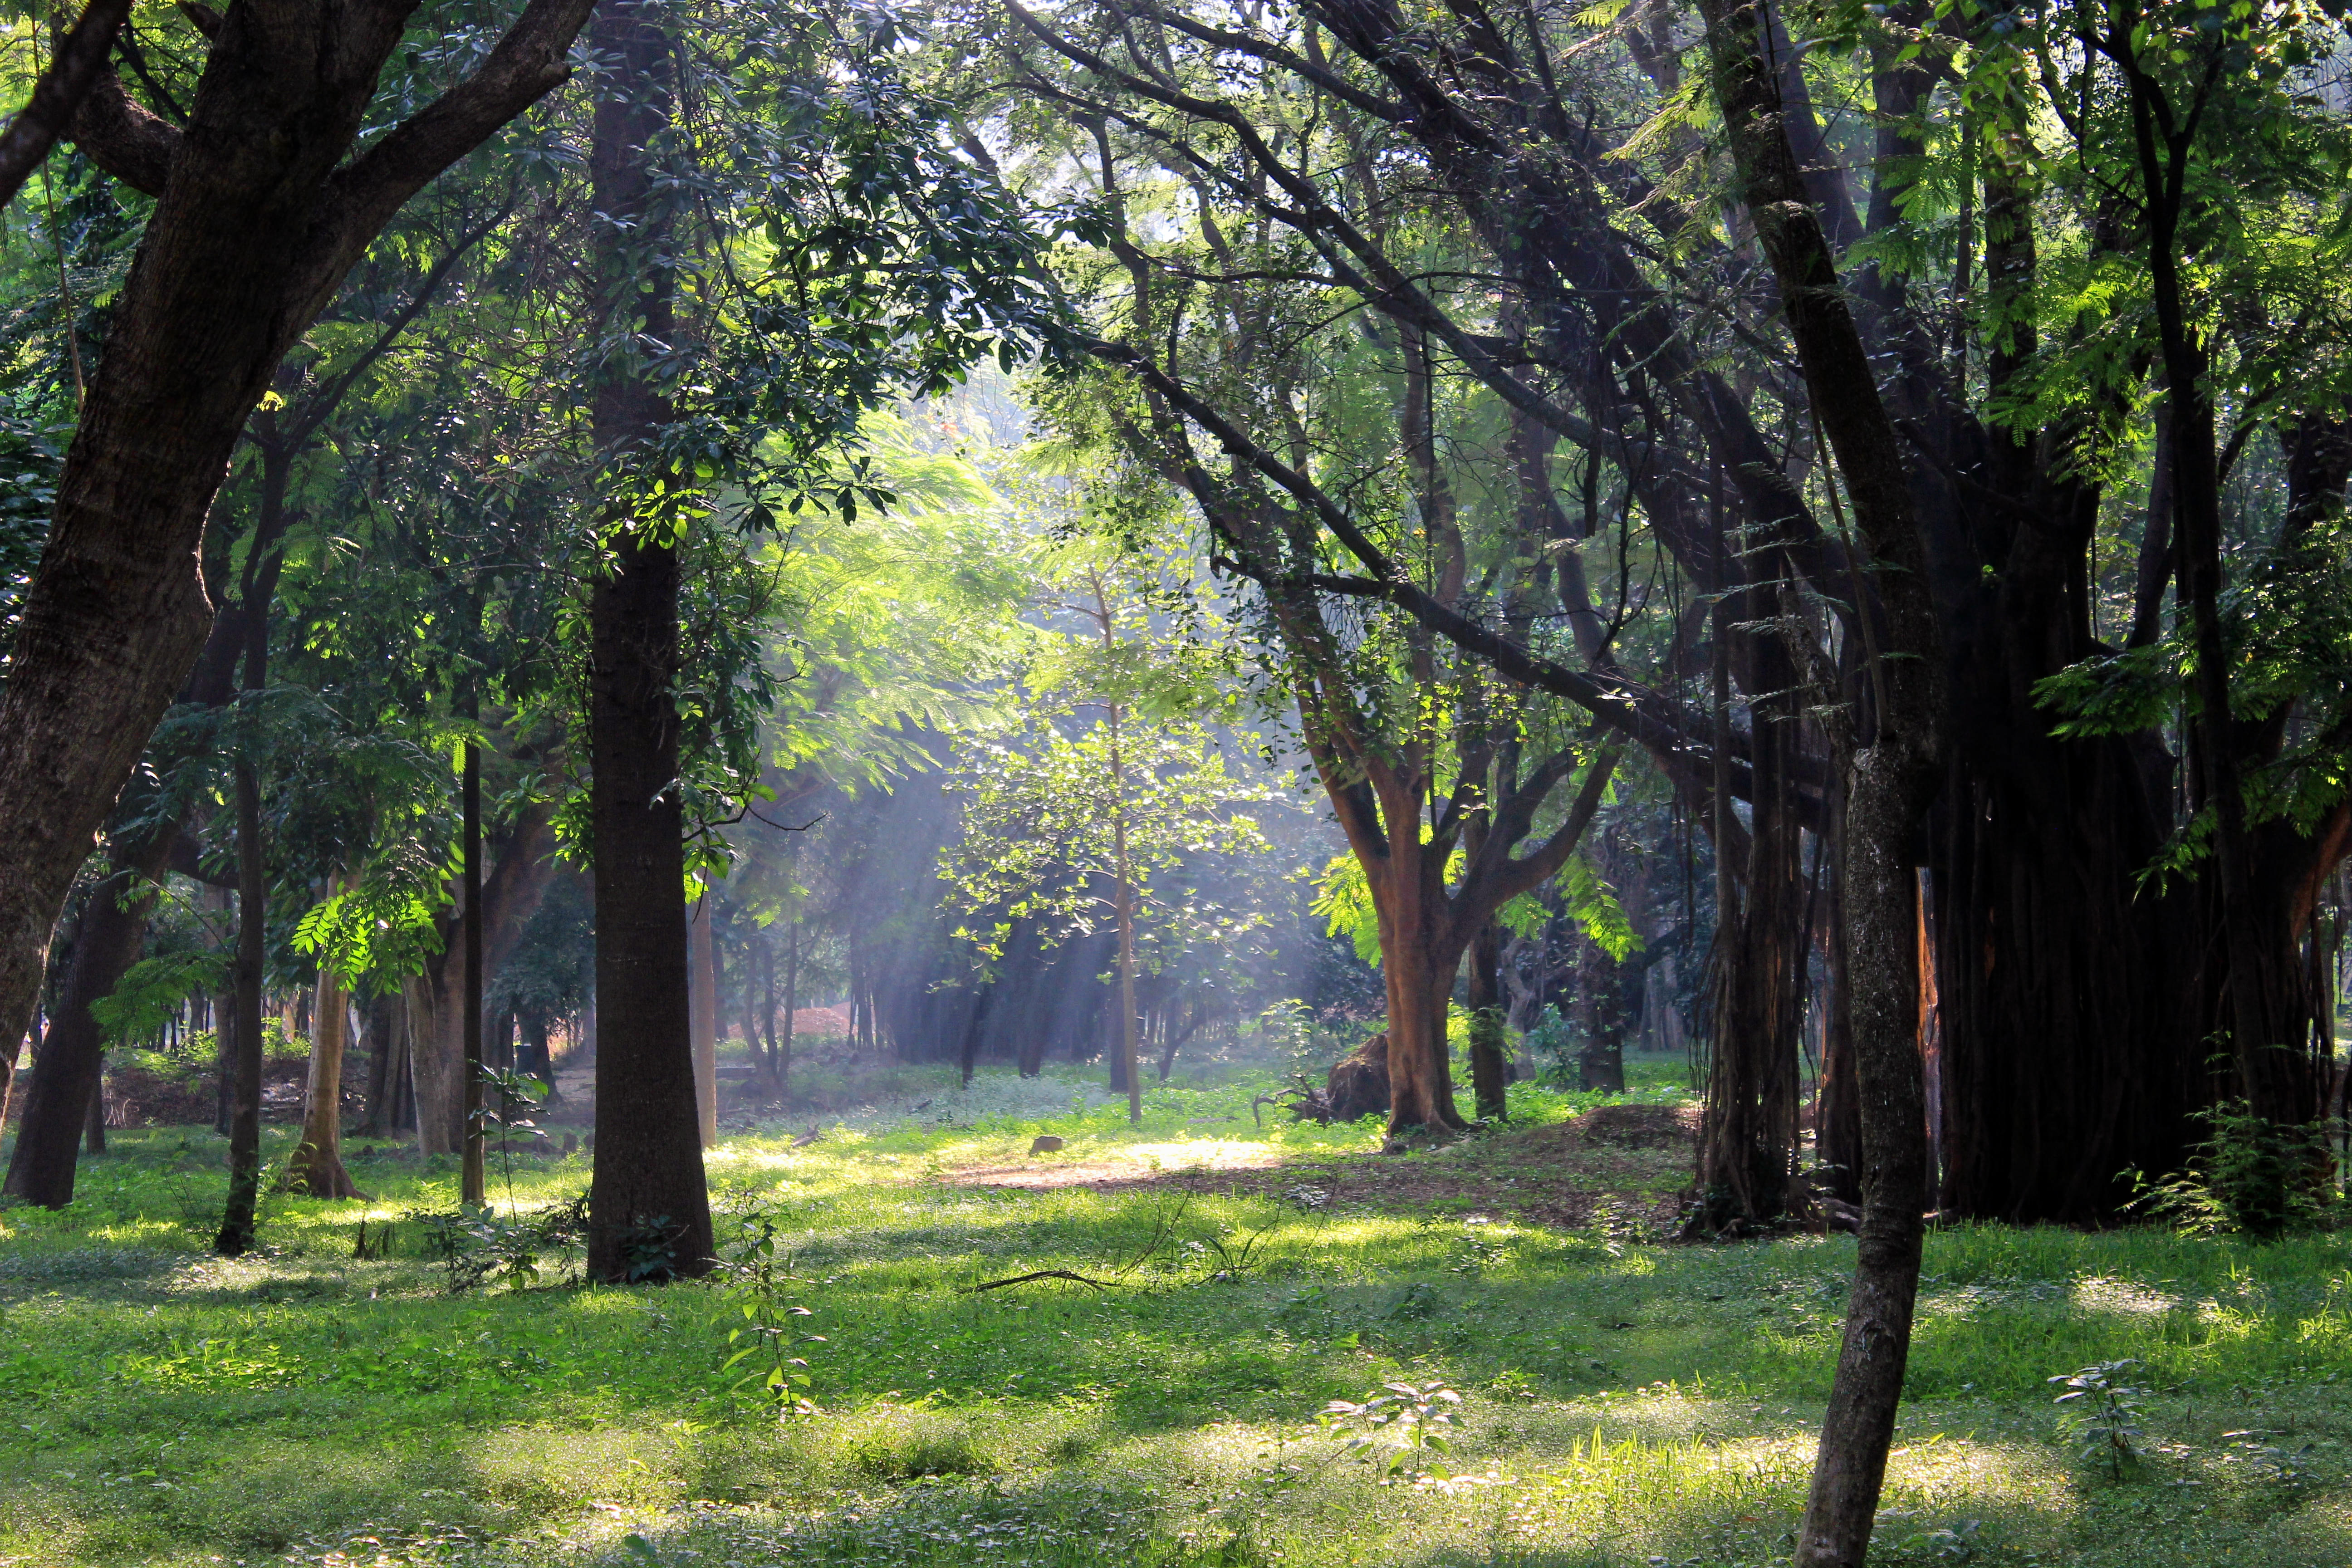 Visit Cubbon Park, one of the most beautiful parks in India